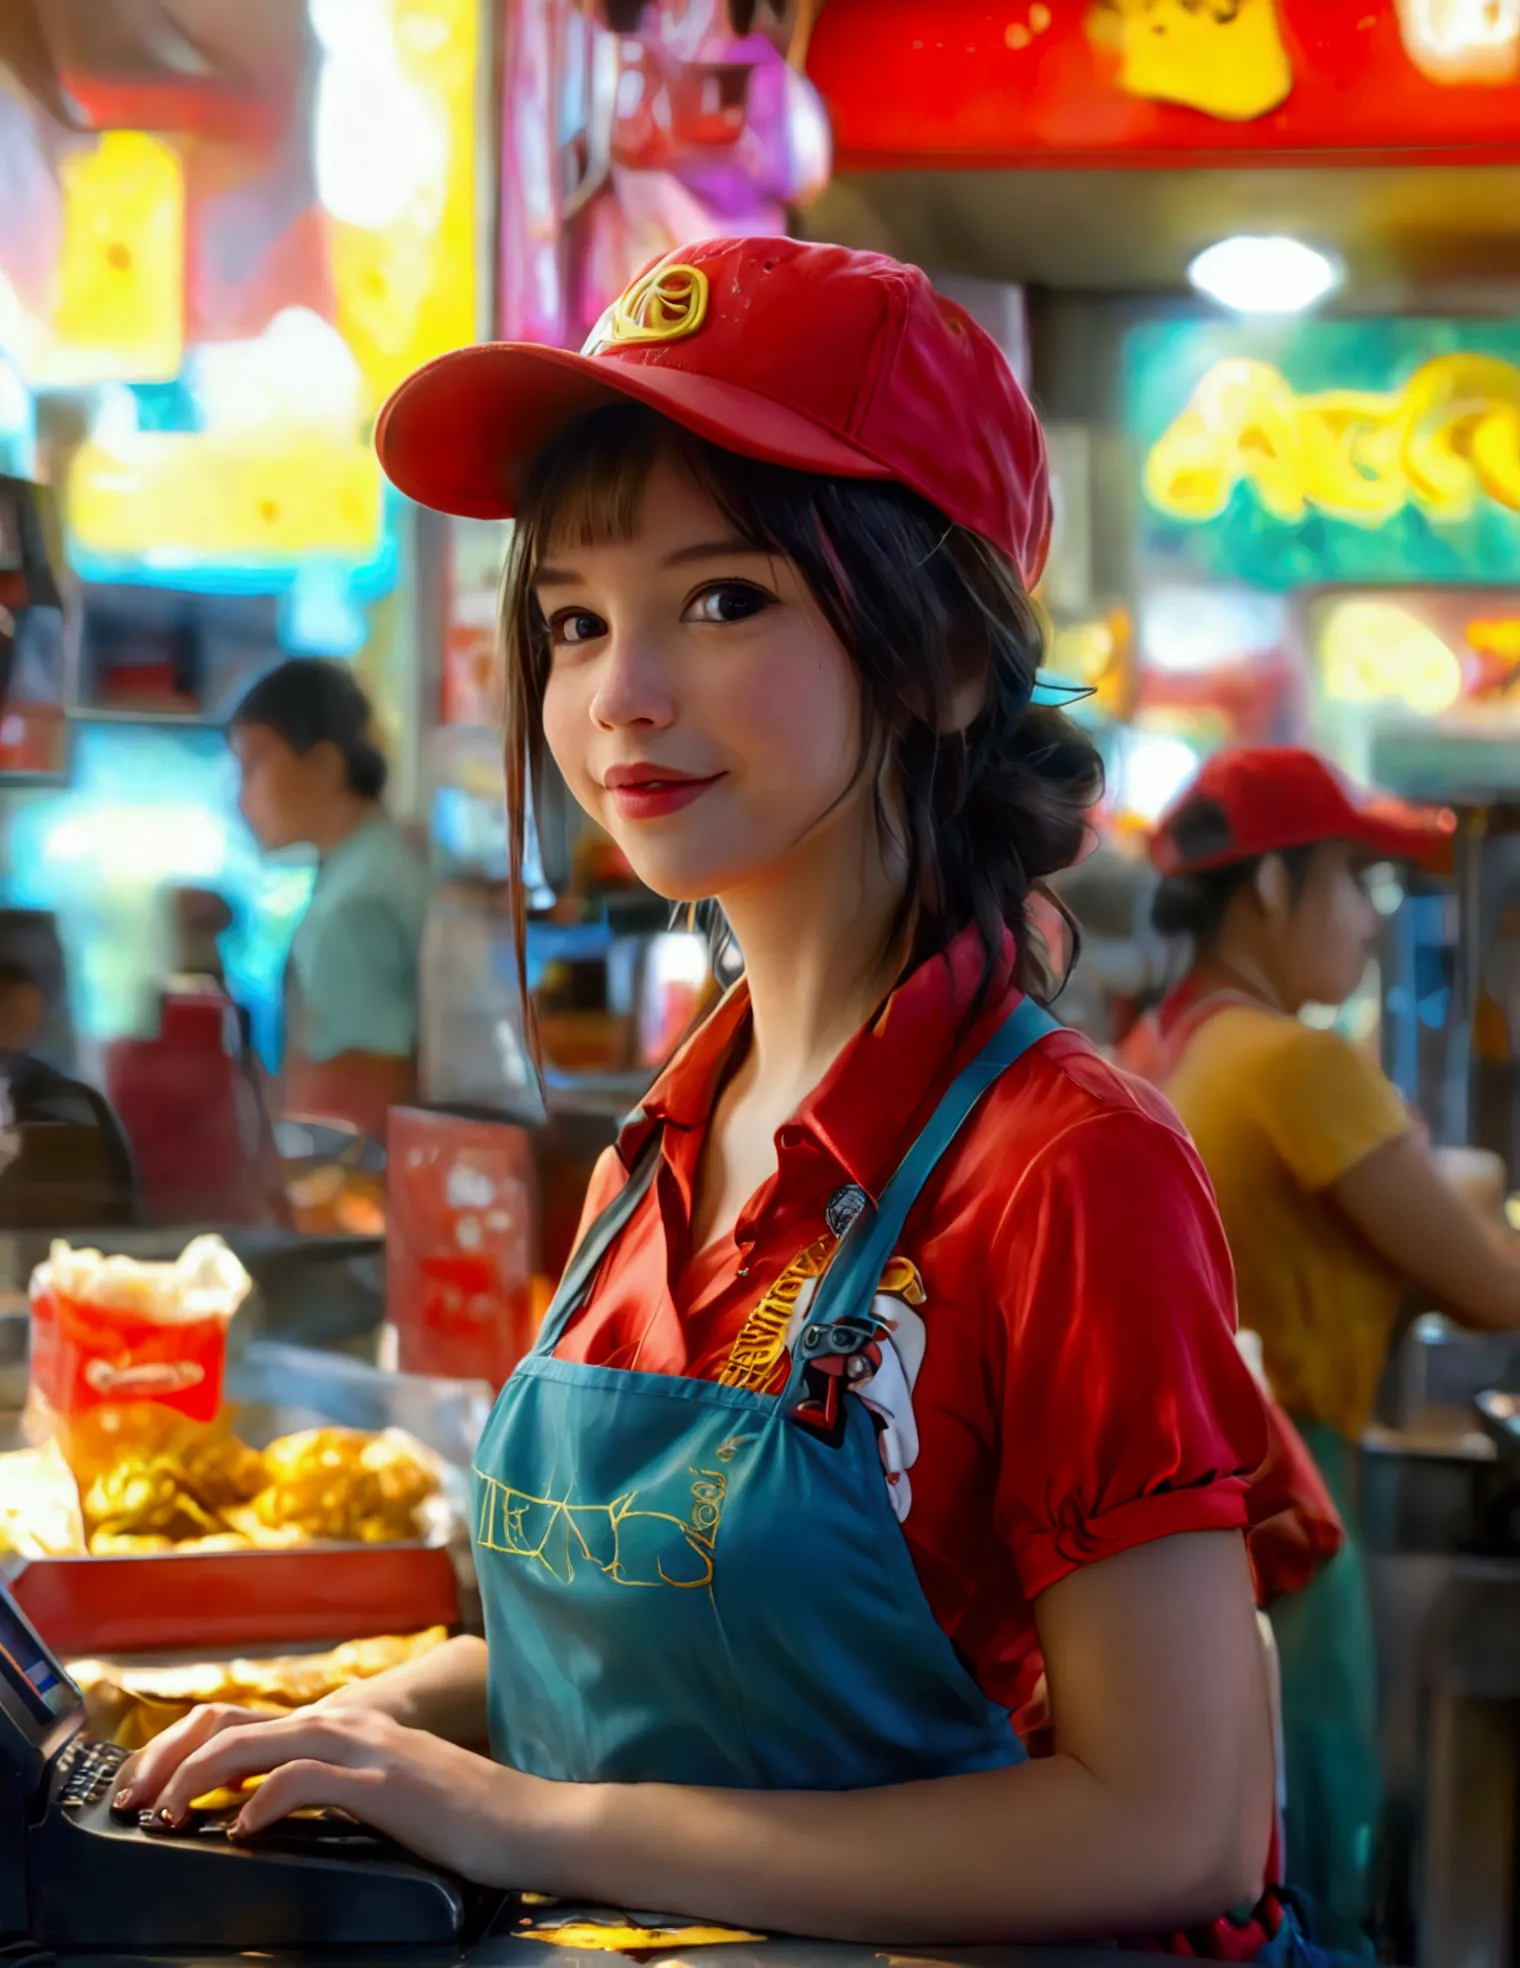 A android fast food worker(cute woman, apron and cap, awkward happy poses), is working the cash register at 'Taco Bell', crowded...